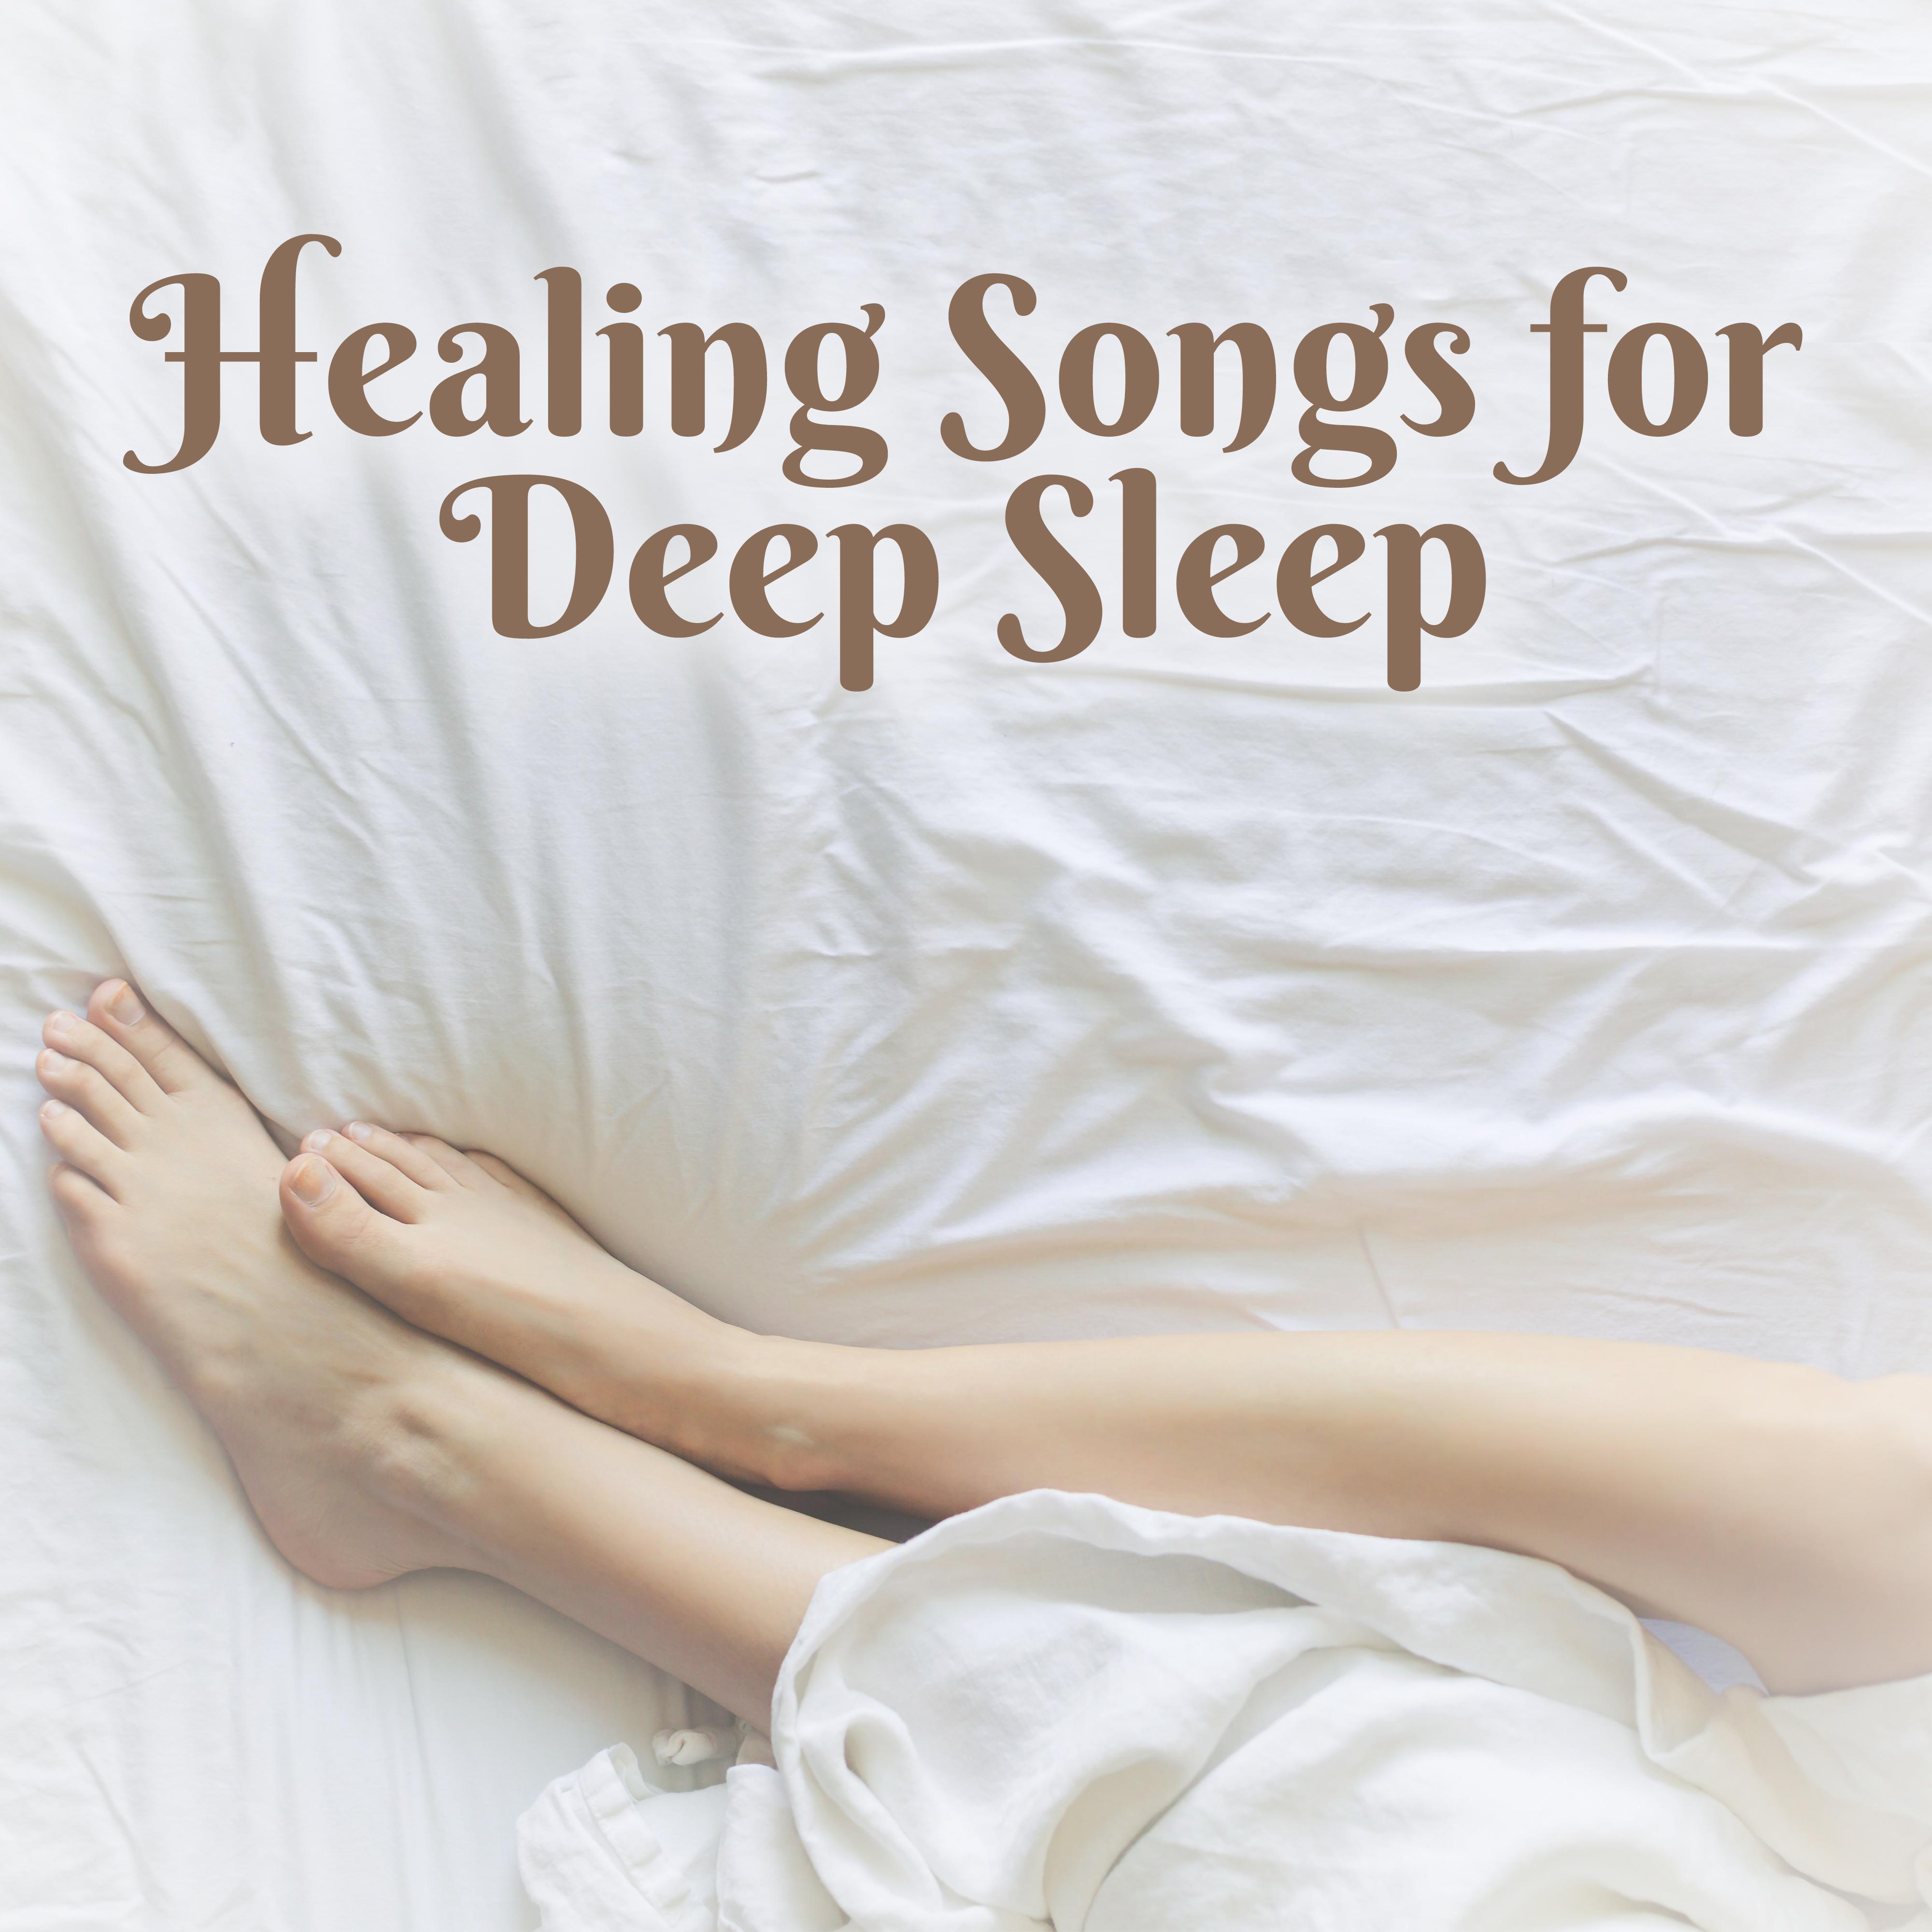 Healing Songs for Deep Sleep – Soft Sounds to Dreaming, Sweet Night Music, Peaceful Dreams, Relaxing Melodies